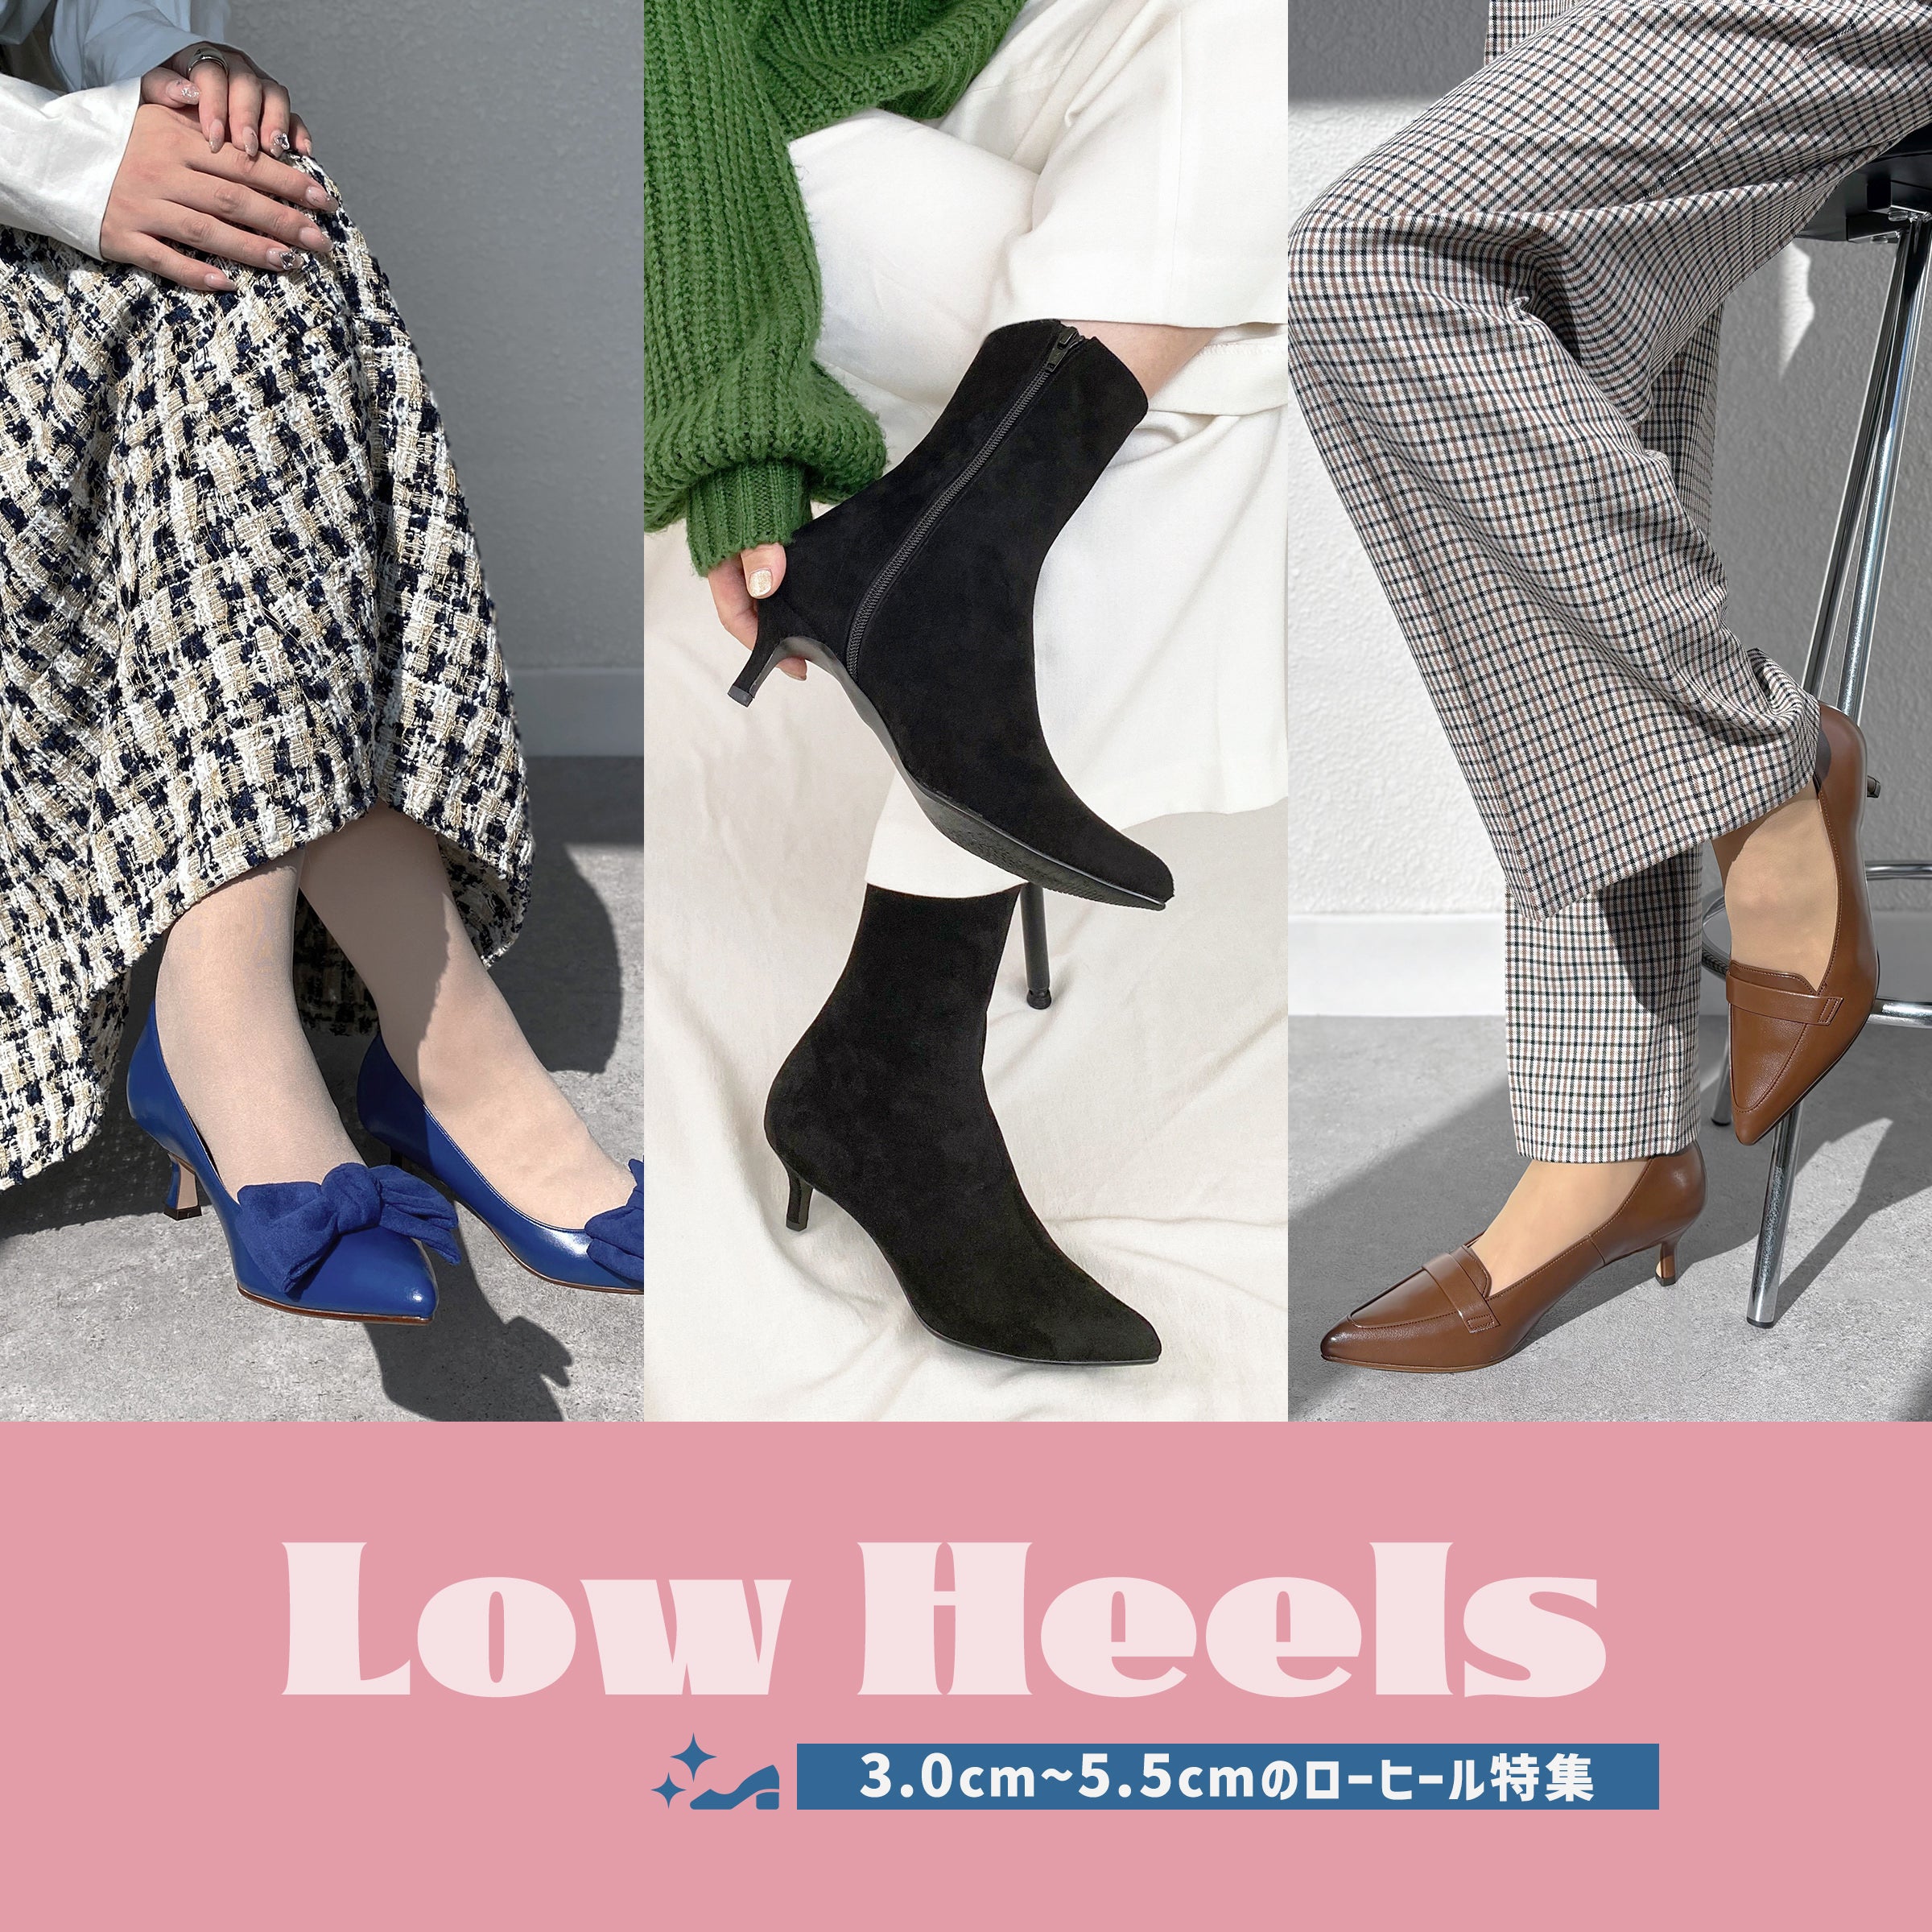 Also suitable for heels beginners! Low heel shoes special feature